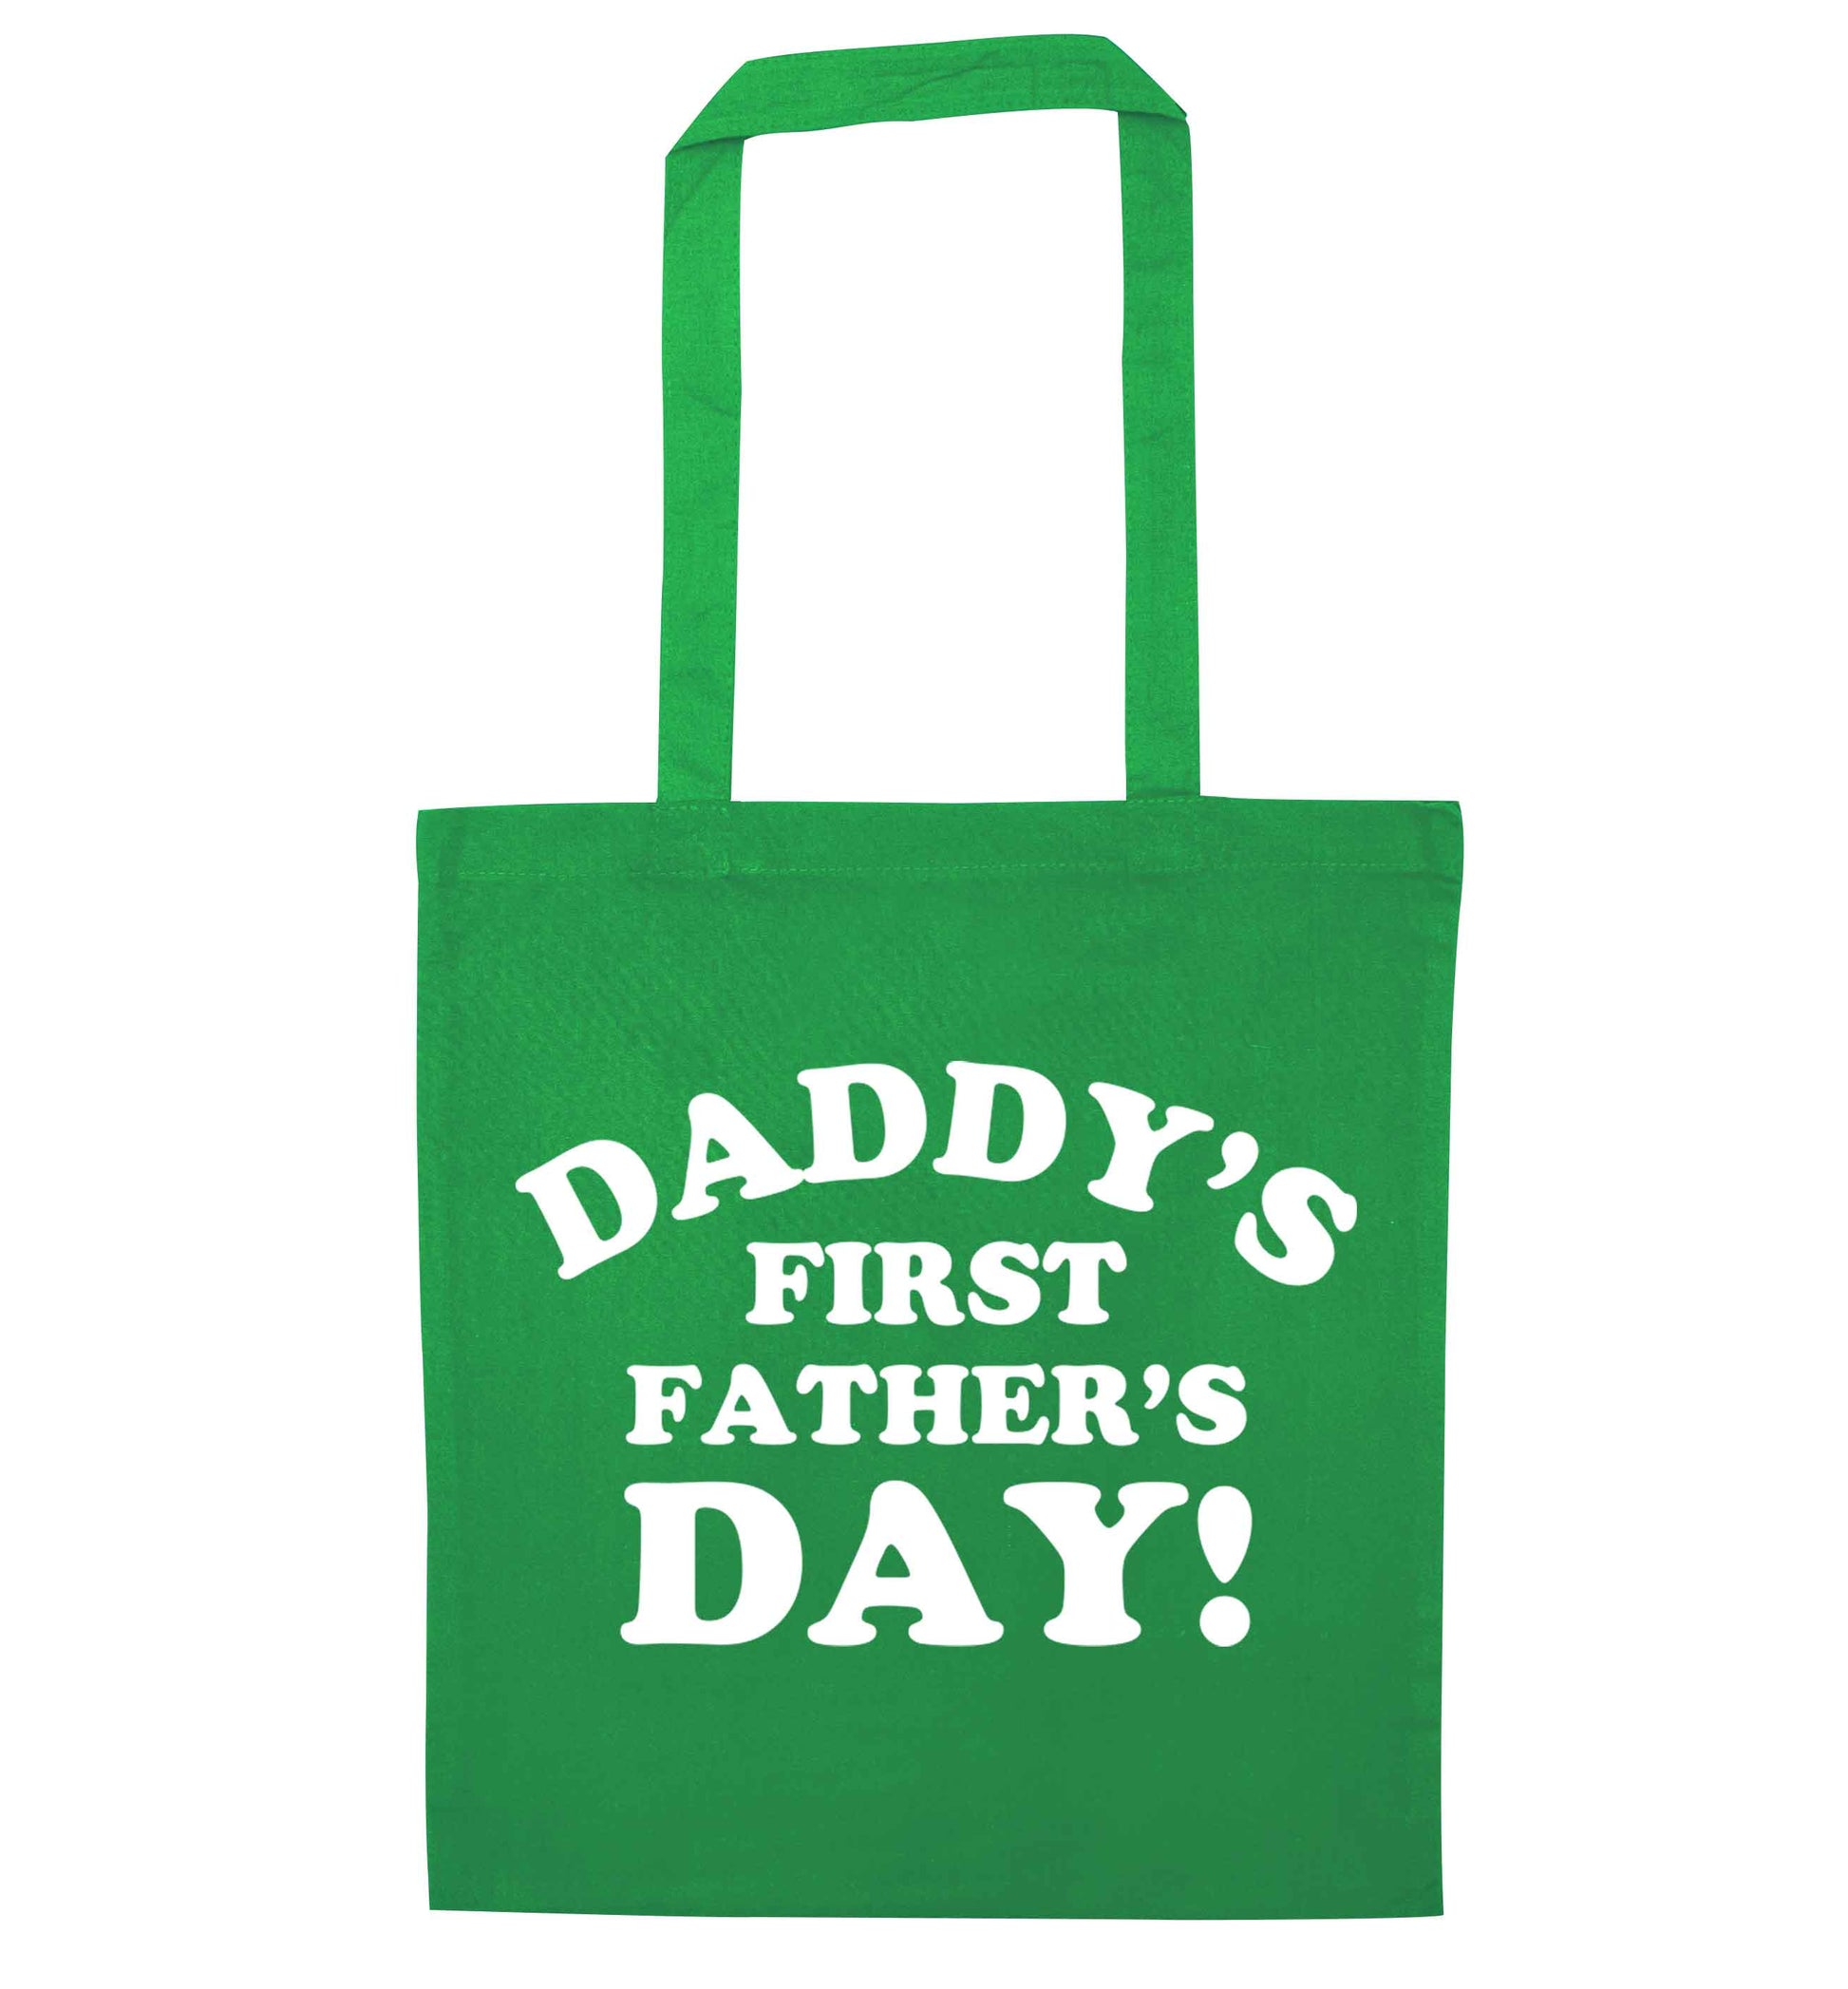 Daddy's first father's day green tote bag